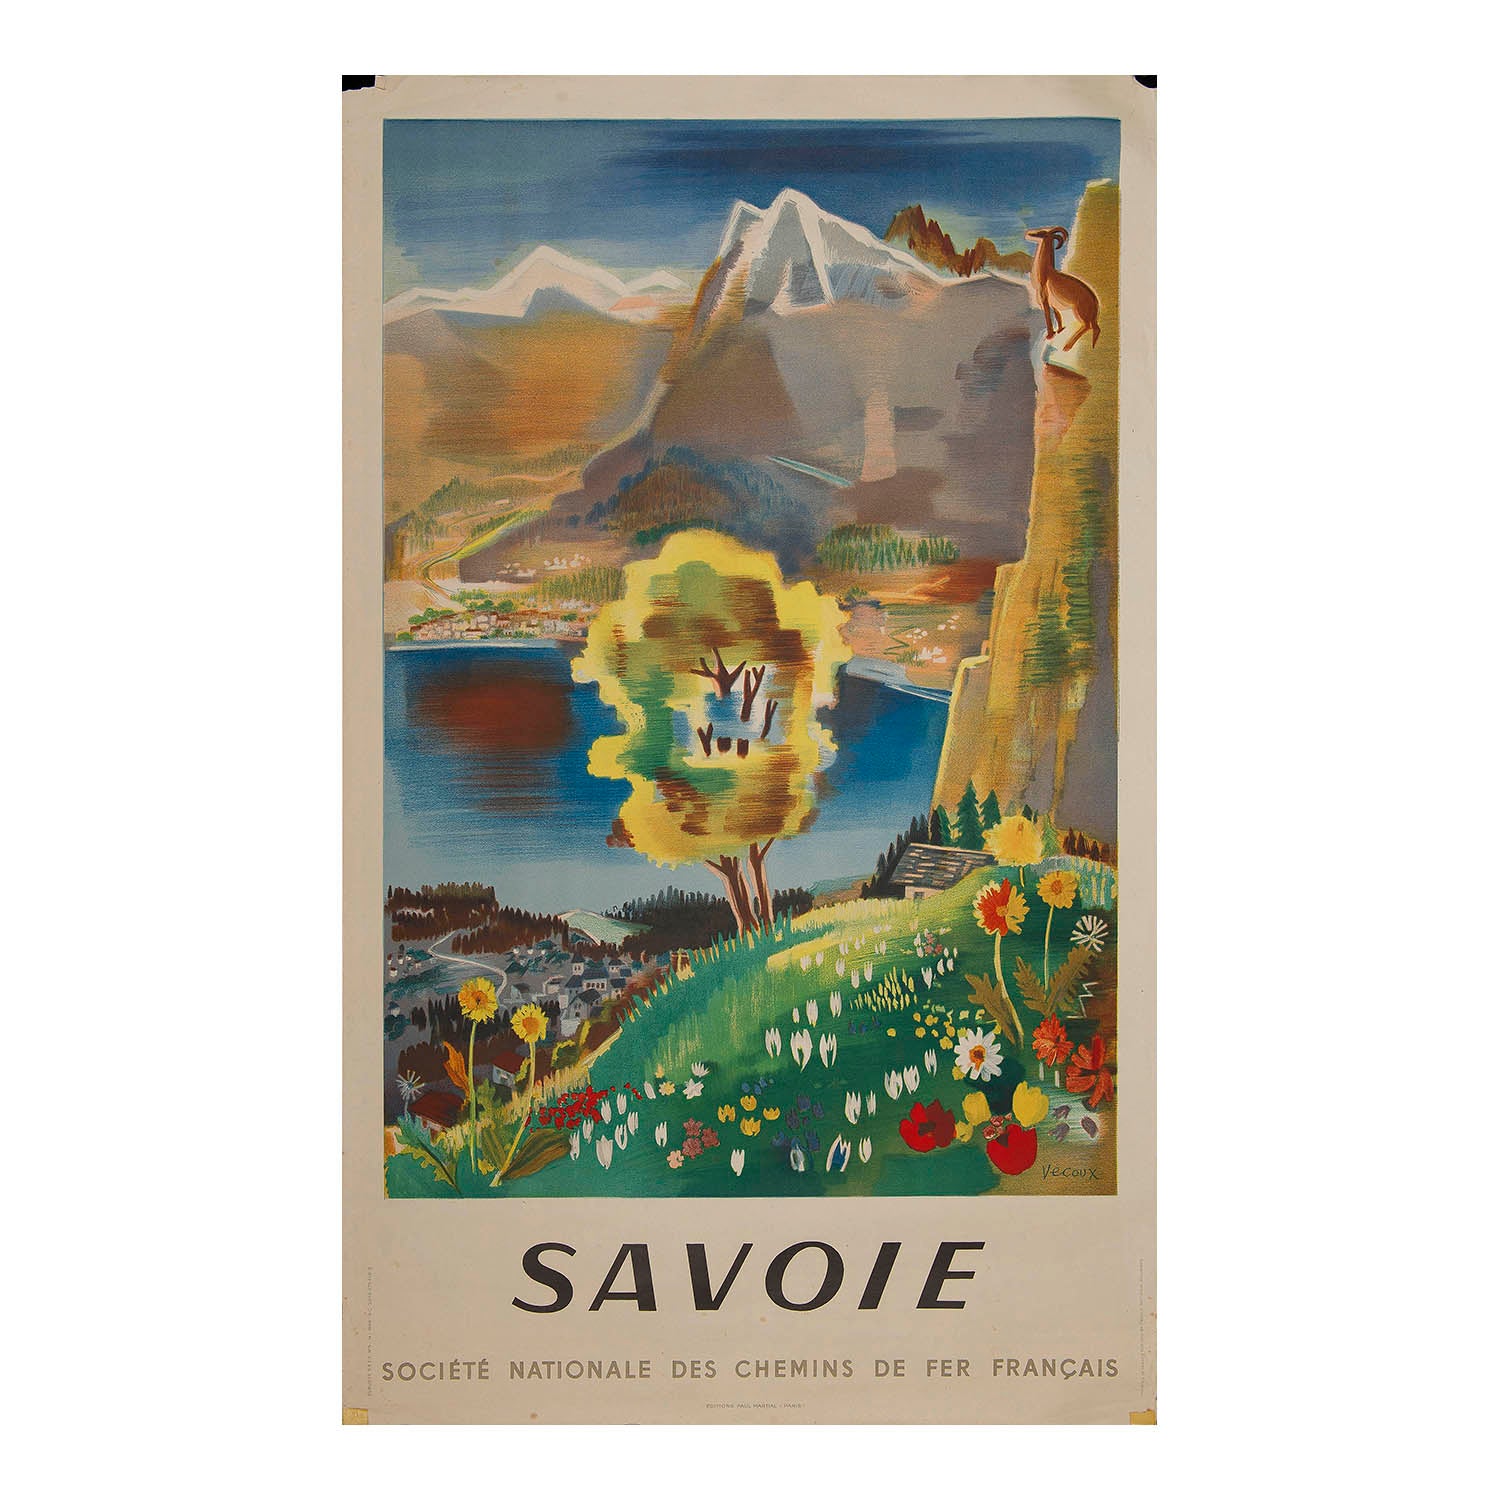 French Railways poster promoting the alpine region of Savoy (Savoie), painted by Vecoux and published in 1946. The poster depicts Savoy in the summertime, with a lush hillside of flowers in the foreground against a backdrop of snow-capped mountains